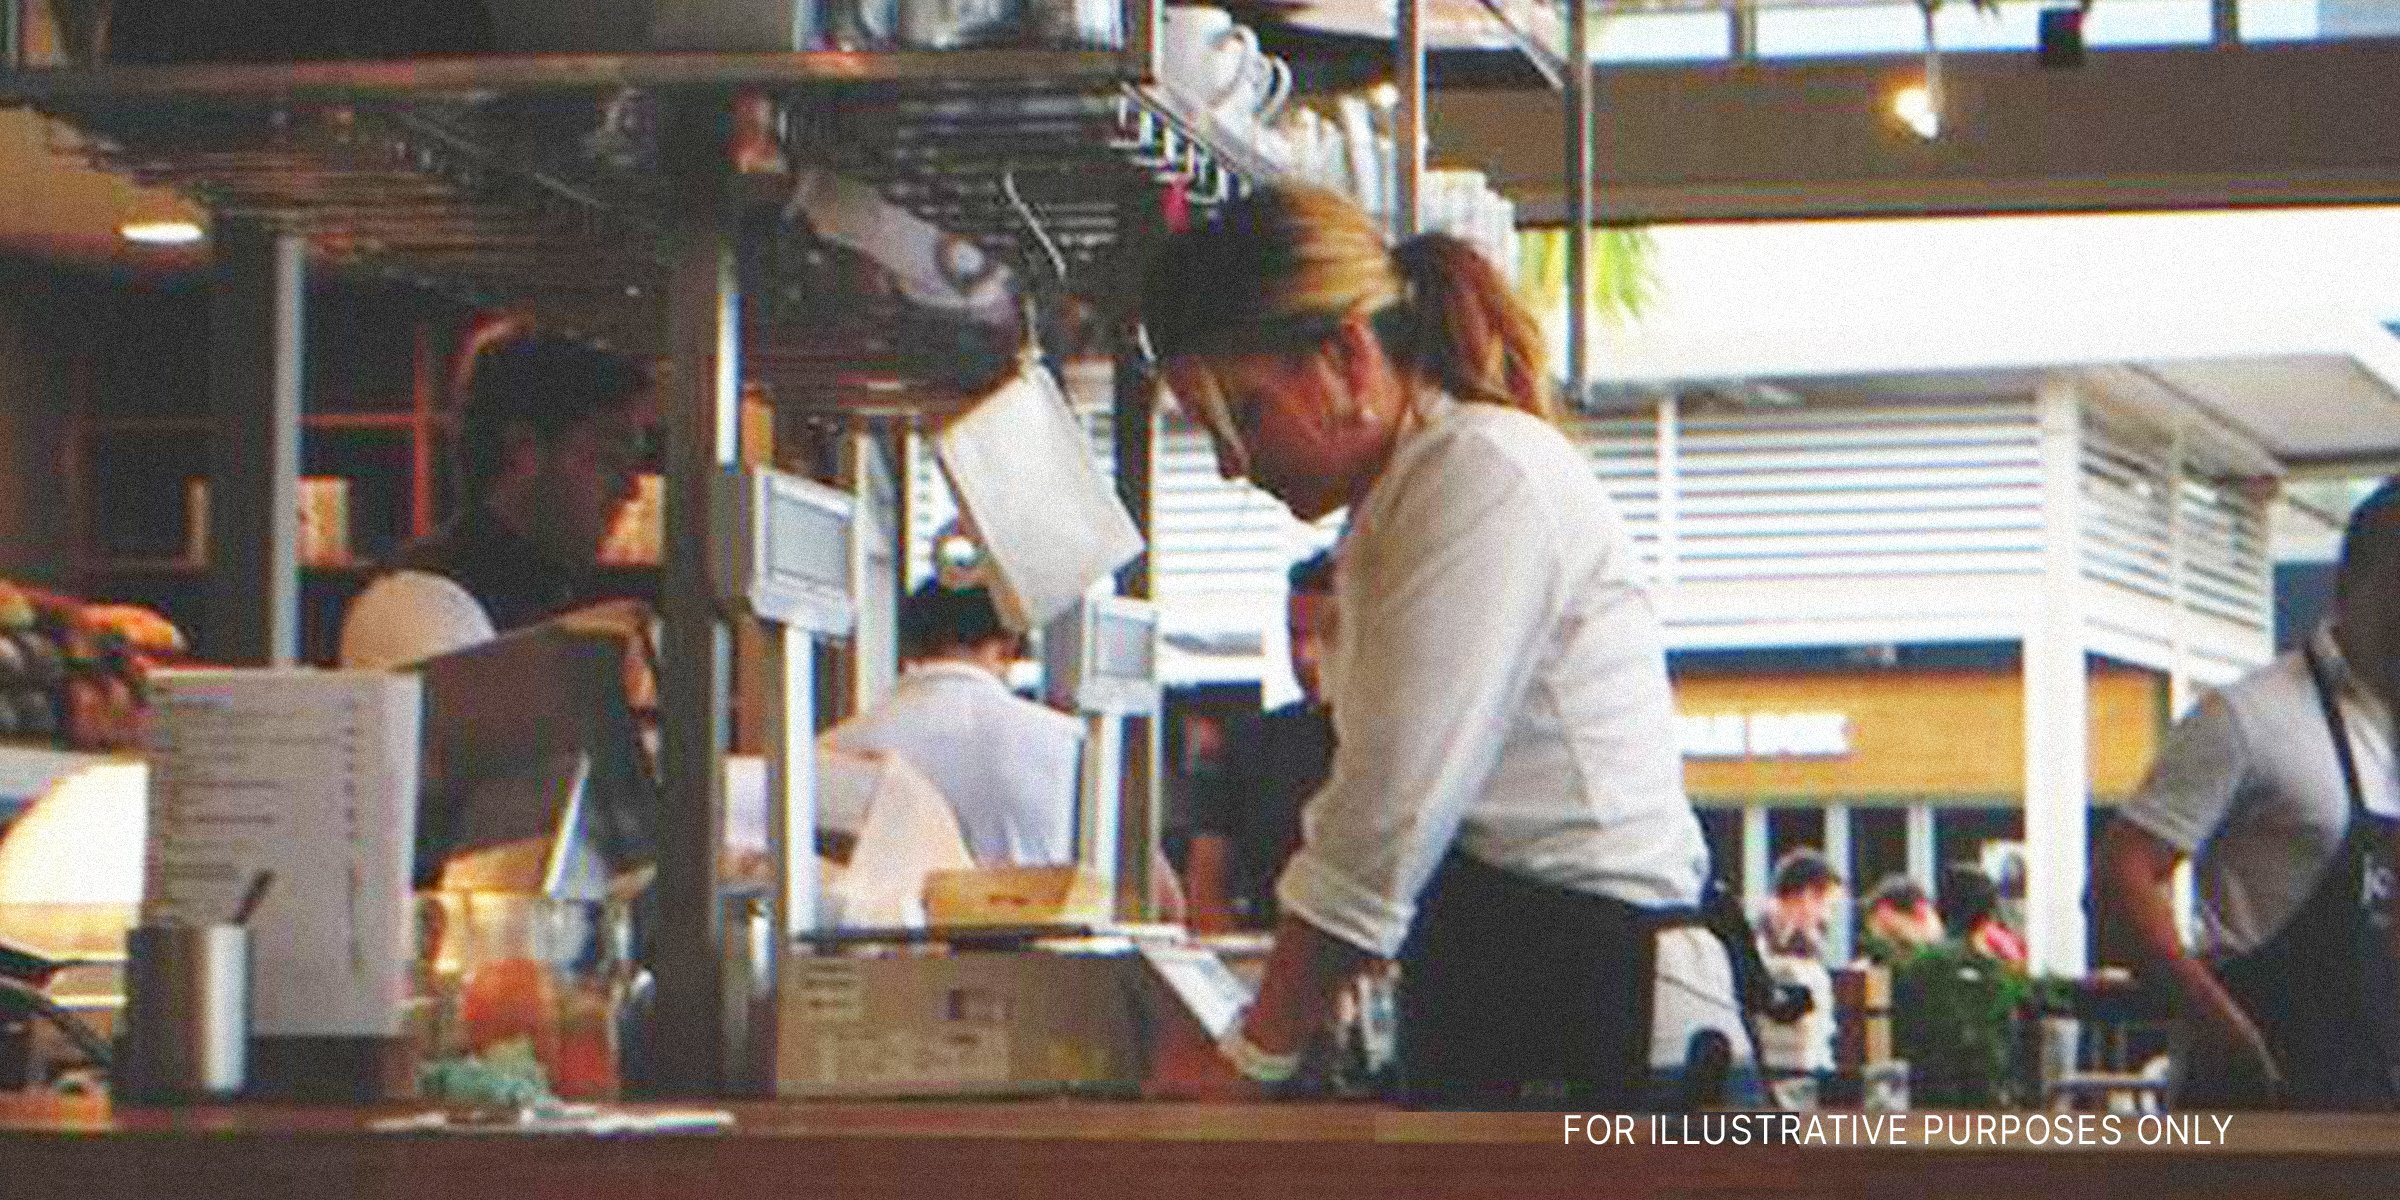 Woman working as a waitress | Source: Flickr / avlxyz (CC BY-SA 2.0)